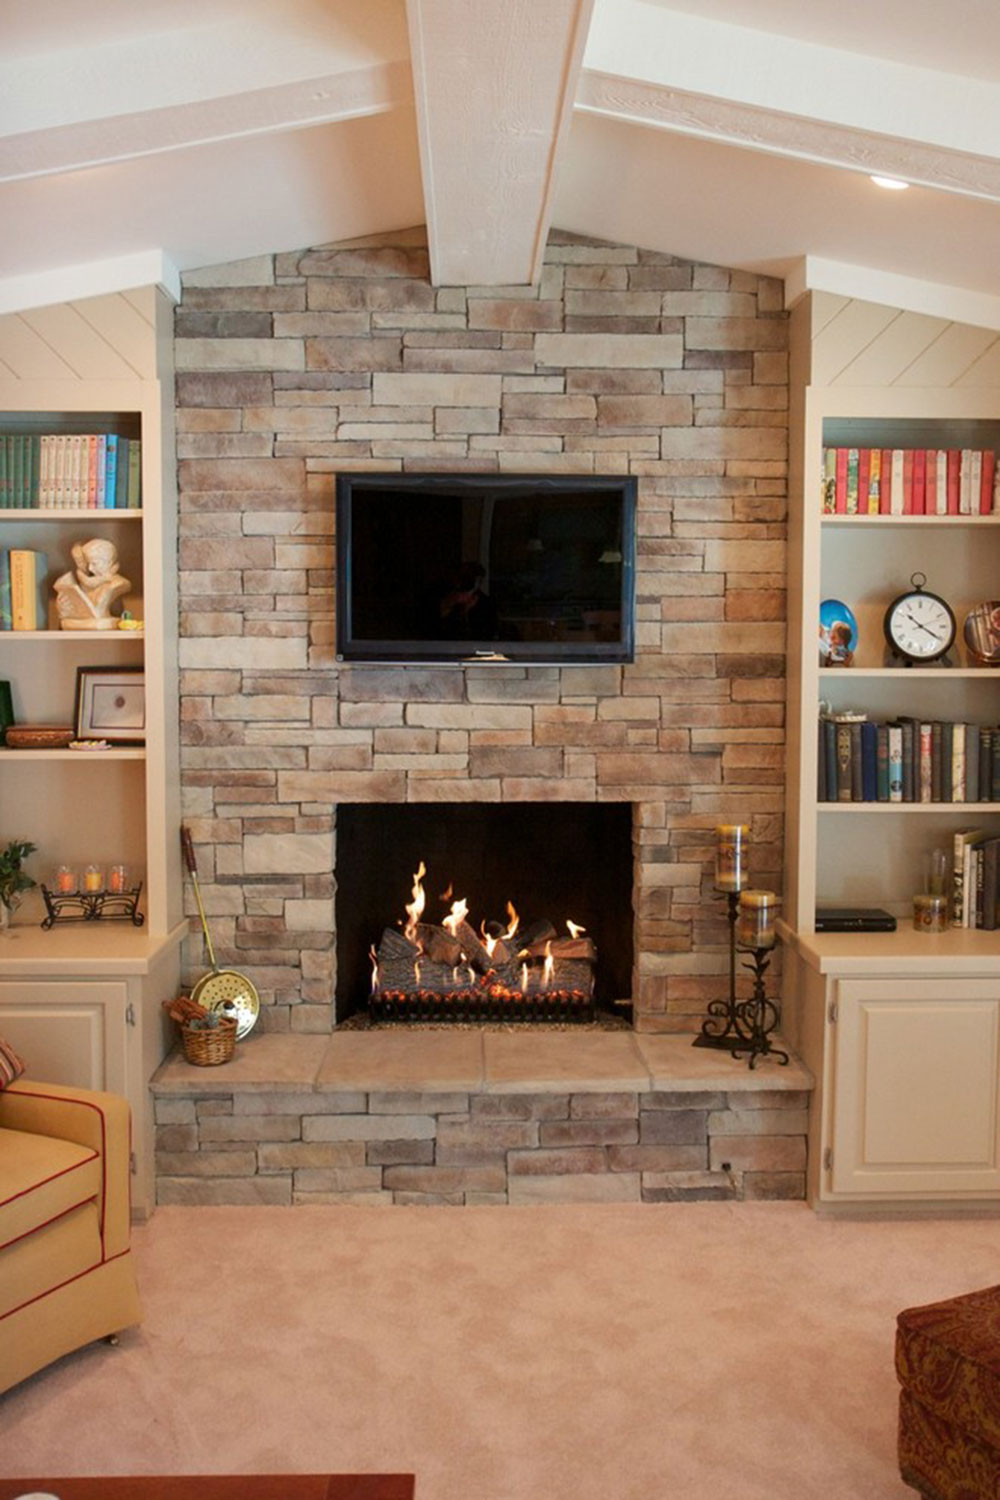 Dry-Stack-Stone-Veneer-Fireplace-by-North-Star-Stone Stone Fireplace Ideas. How to Decorate a Stone Fireplace.